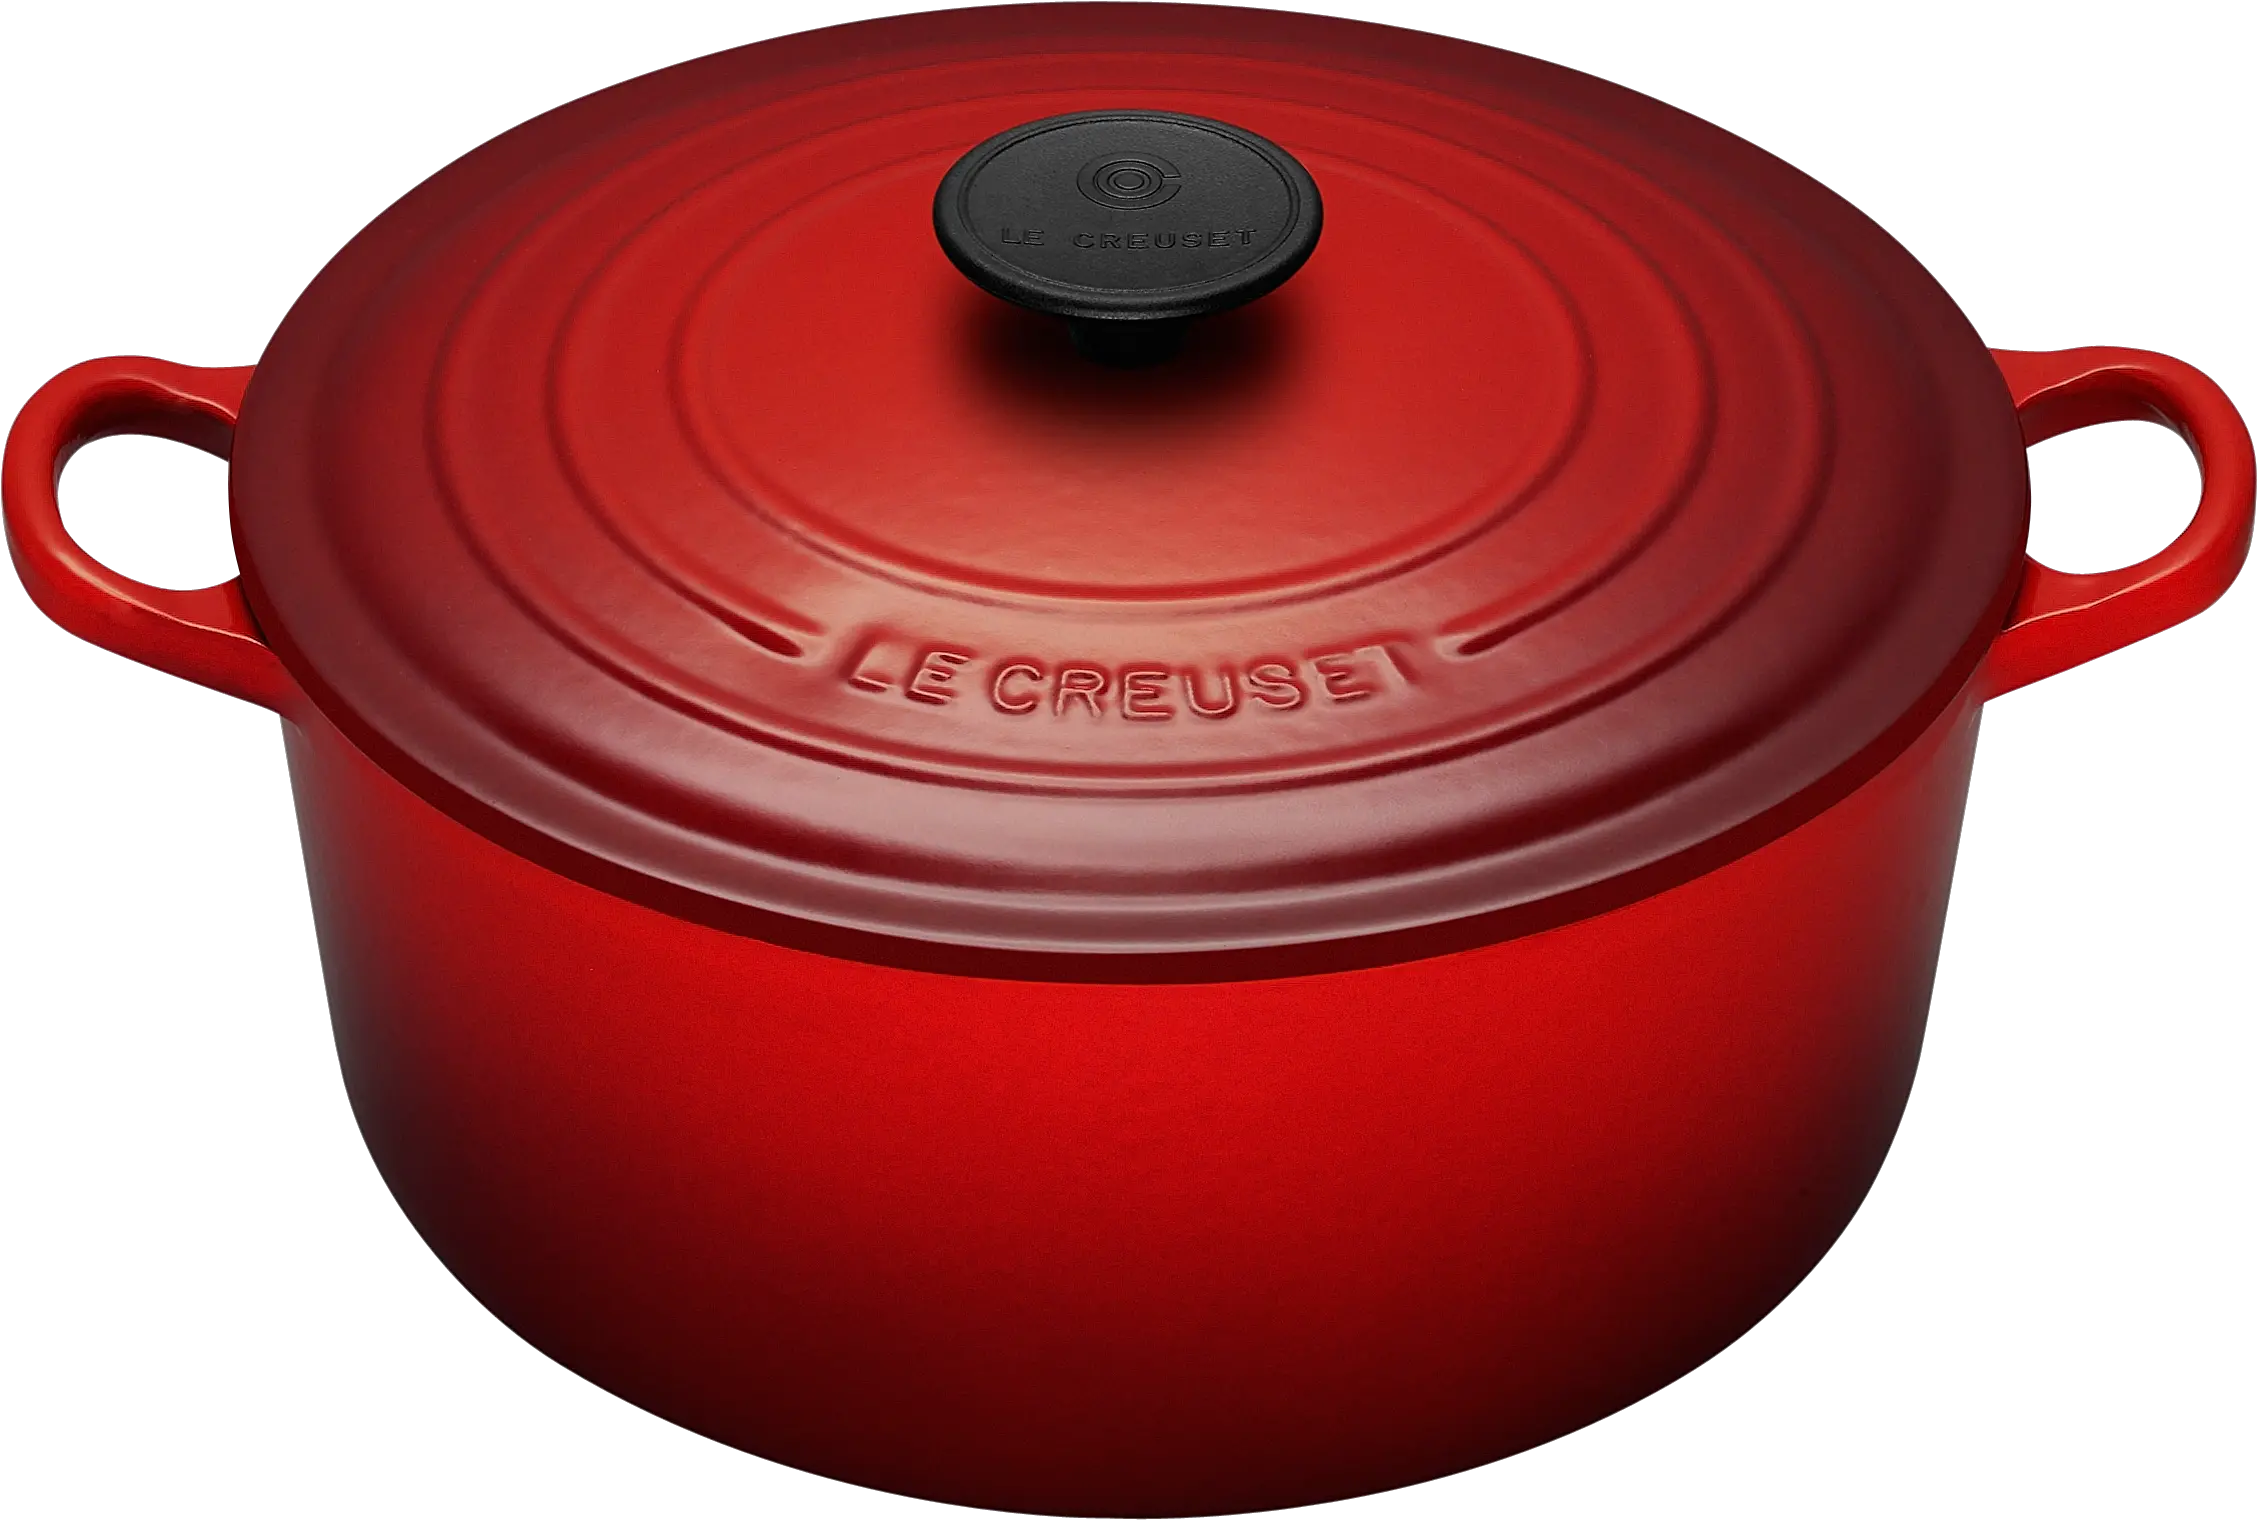 Cooking Pot Png Image Without Background Web Icons Le Creuset Cast Iron Pan Png